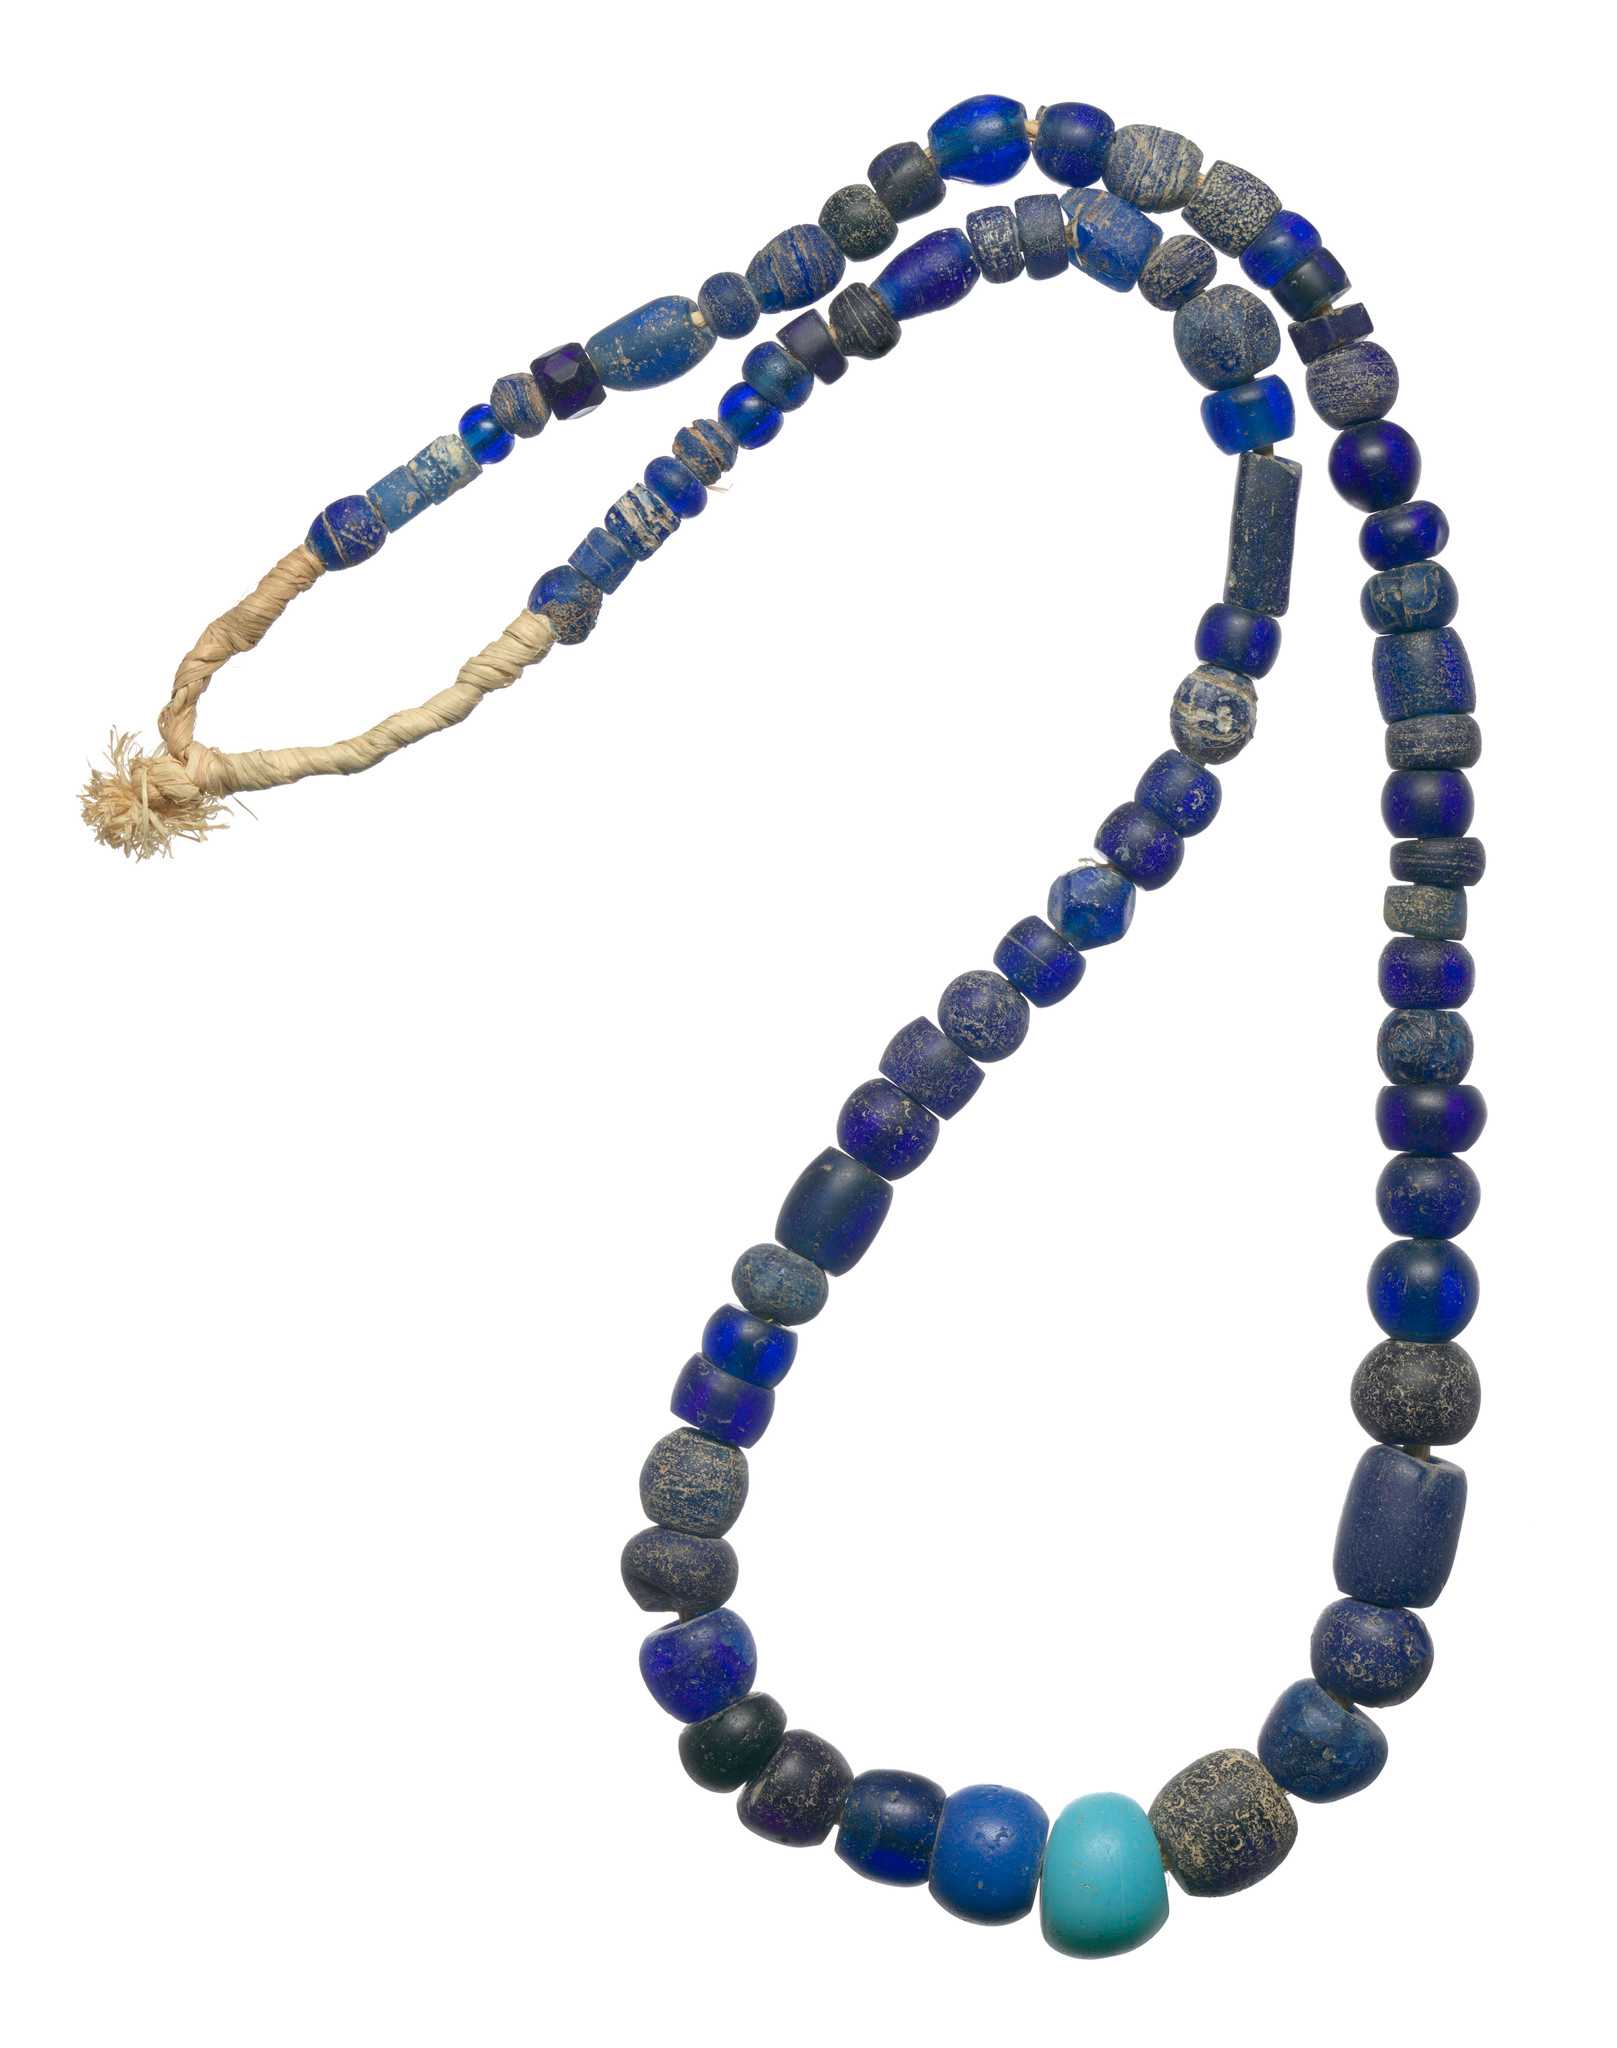 A looped strand of various colored and sized blue glass beads strung on natural fiber.